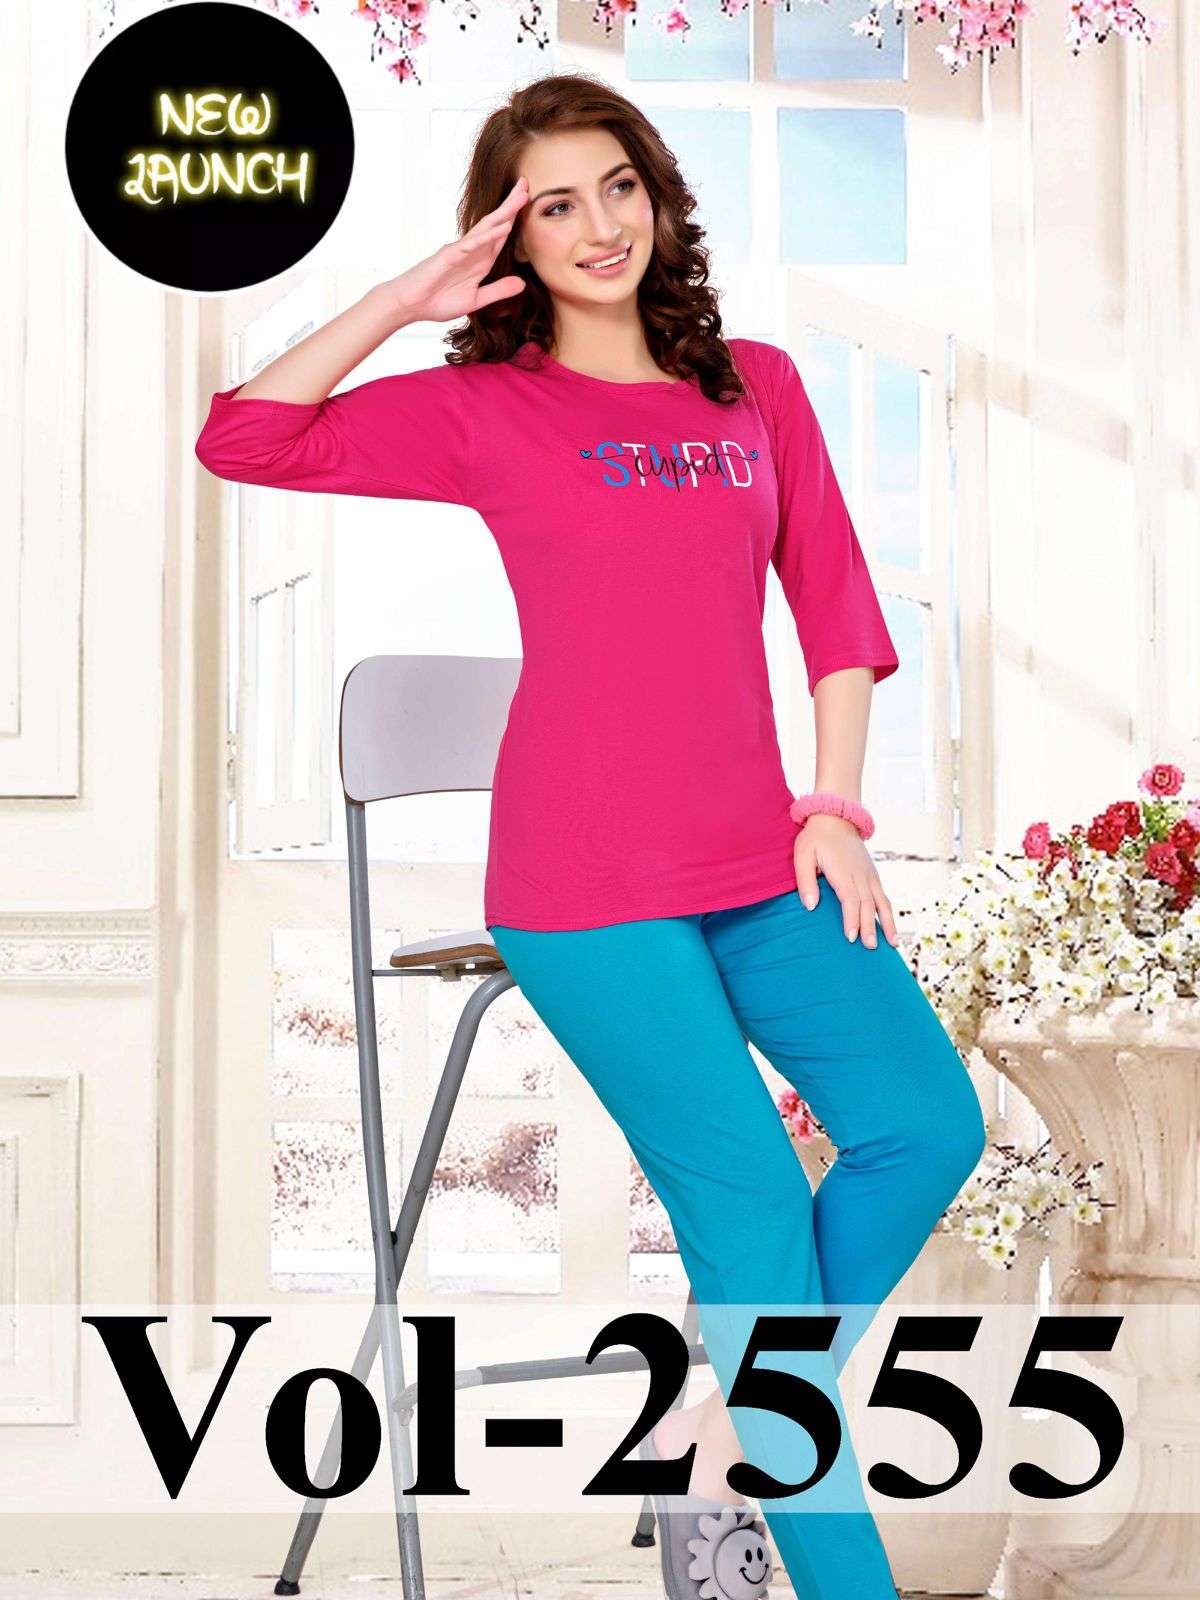 SUMMER SPECIAL VOL.2555 Heavy Shinker Hosiery Cotton Night Suits 3/4 Full sleeve CATALOG WHOLESALER BEST RATE